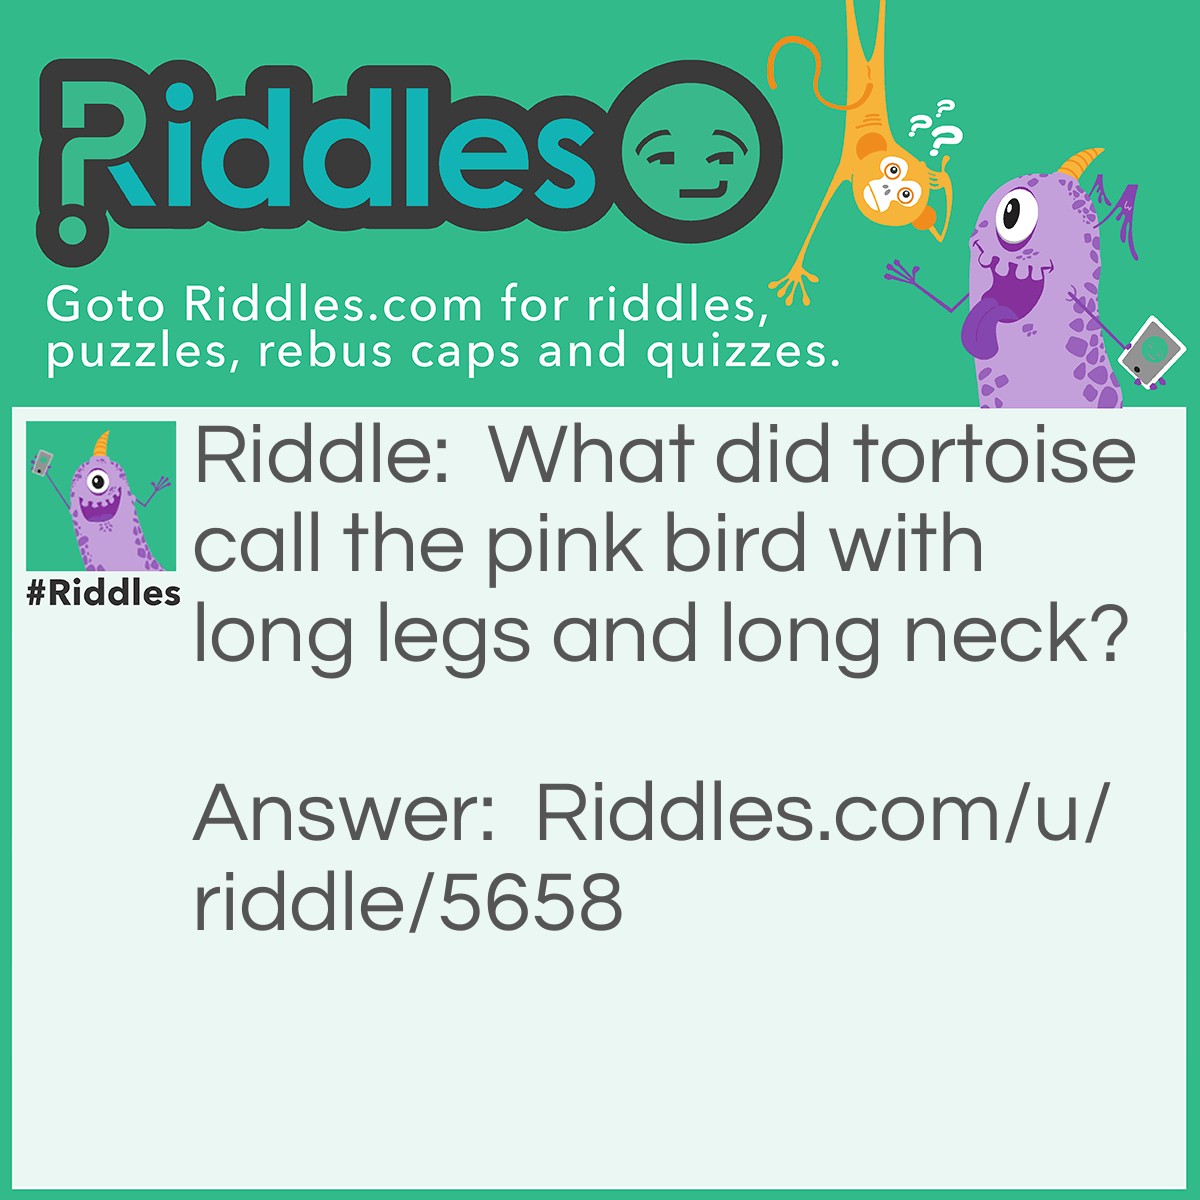 Riddle: What did tortoise call the pink bird with long legs and long neck? Answer: Flaming O (flamingo).